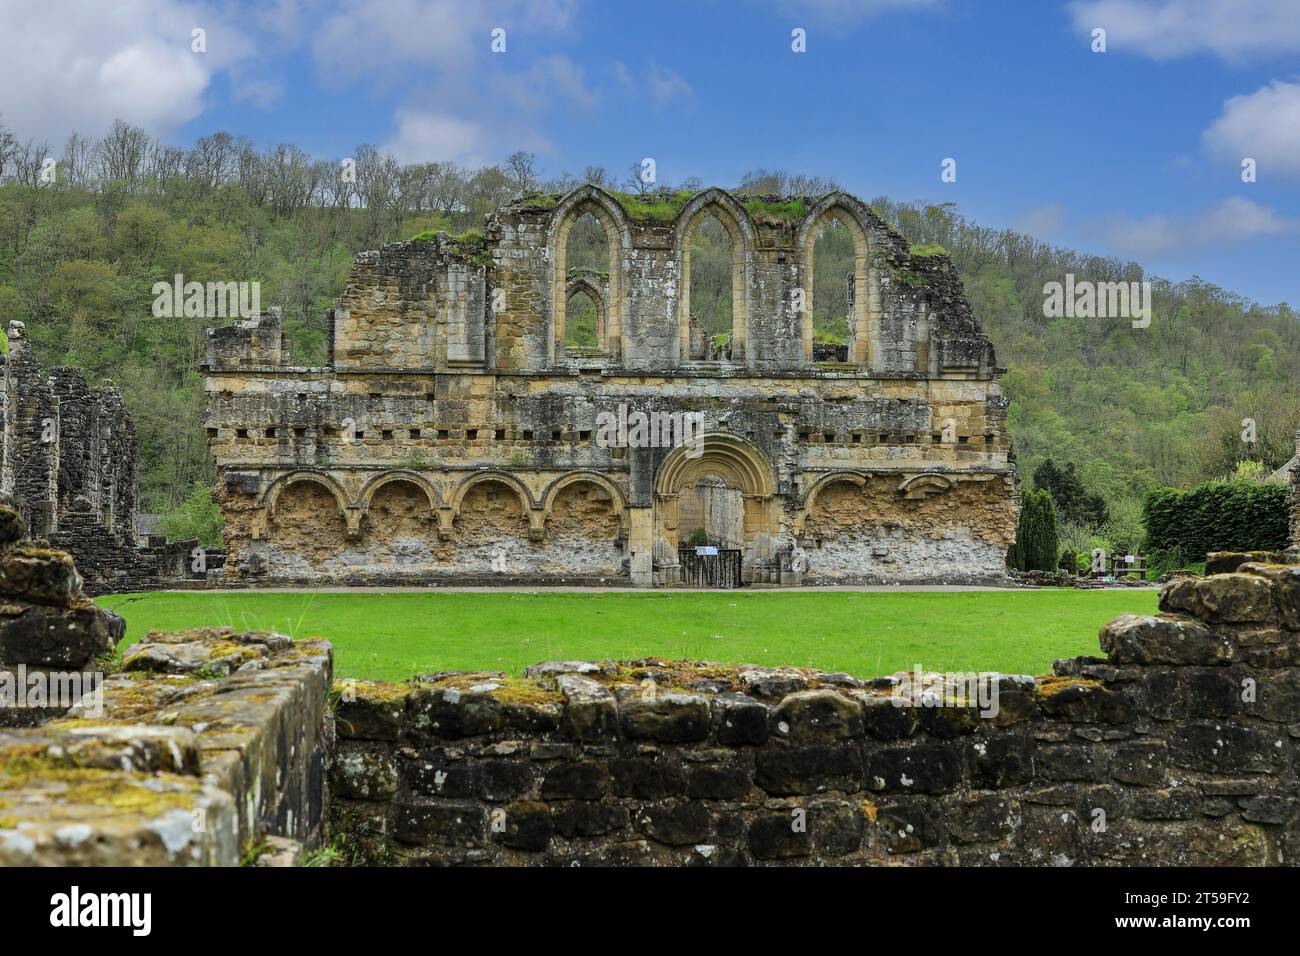 The remains of the Refectory at the Rievaulx Abbey ruins, Rievaulx, near Helmsley, in the North York Moors National Park, North Yorkshire, England, UK Stock Photo